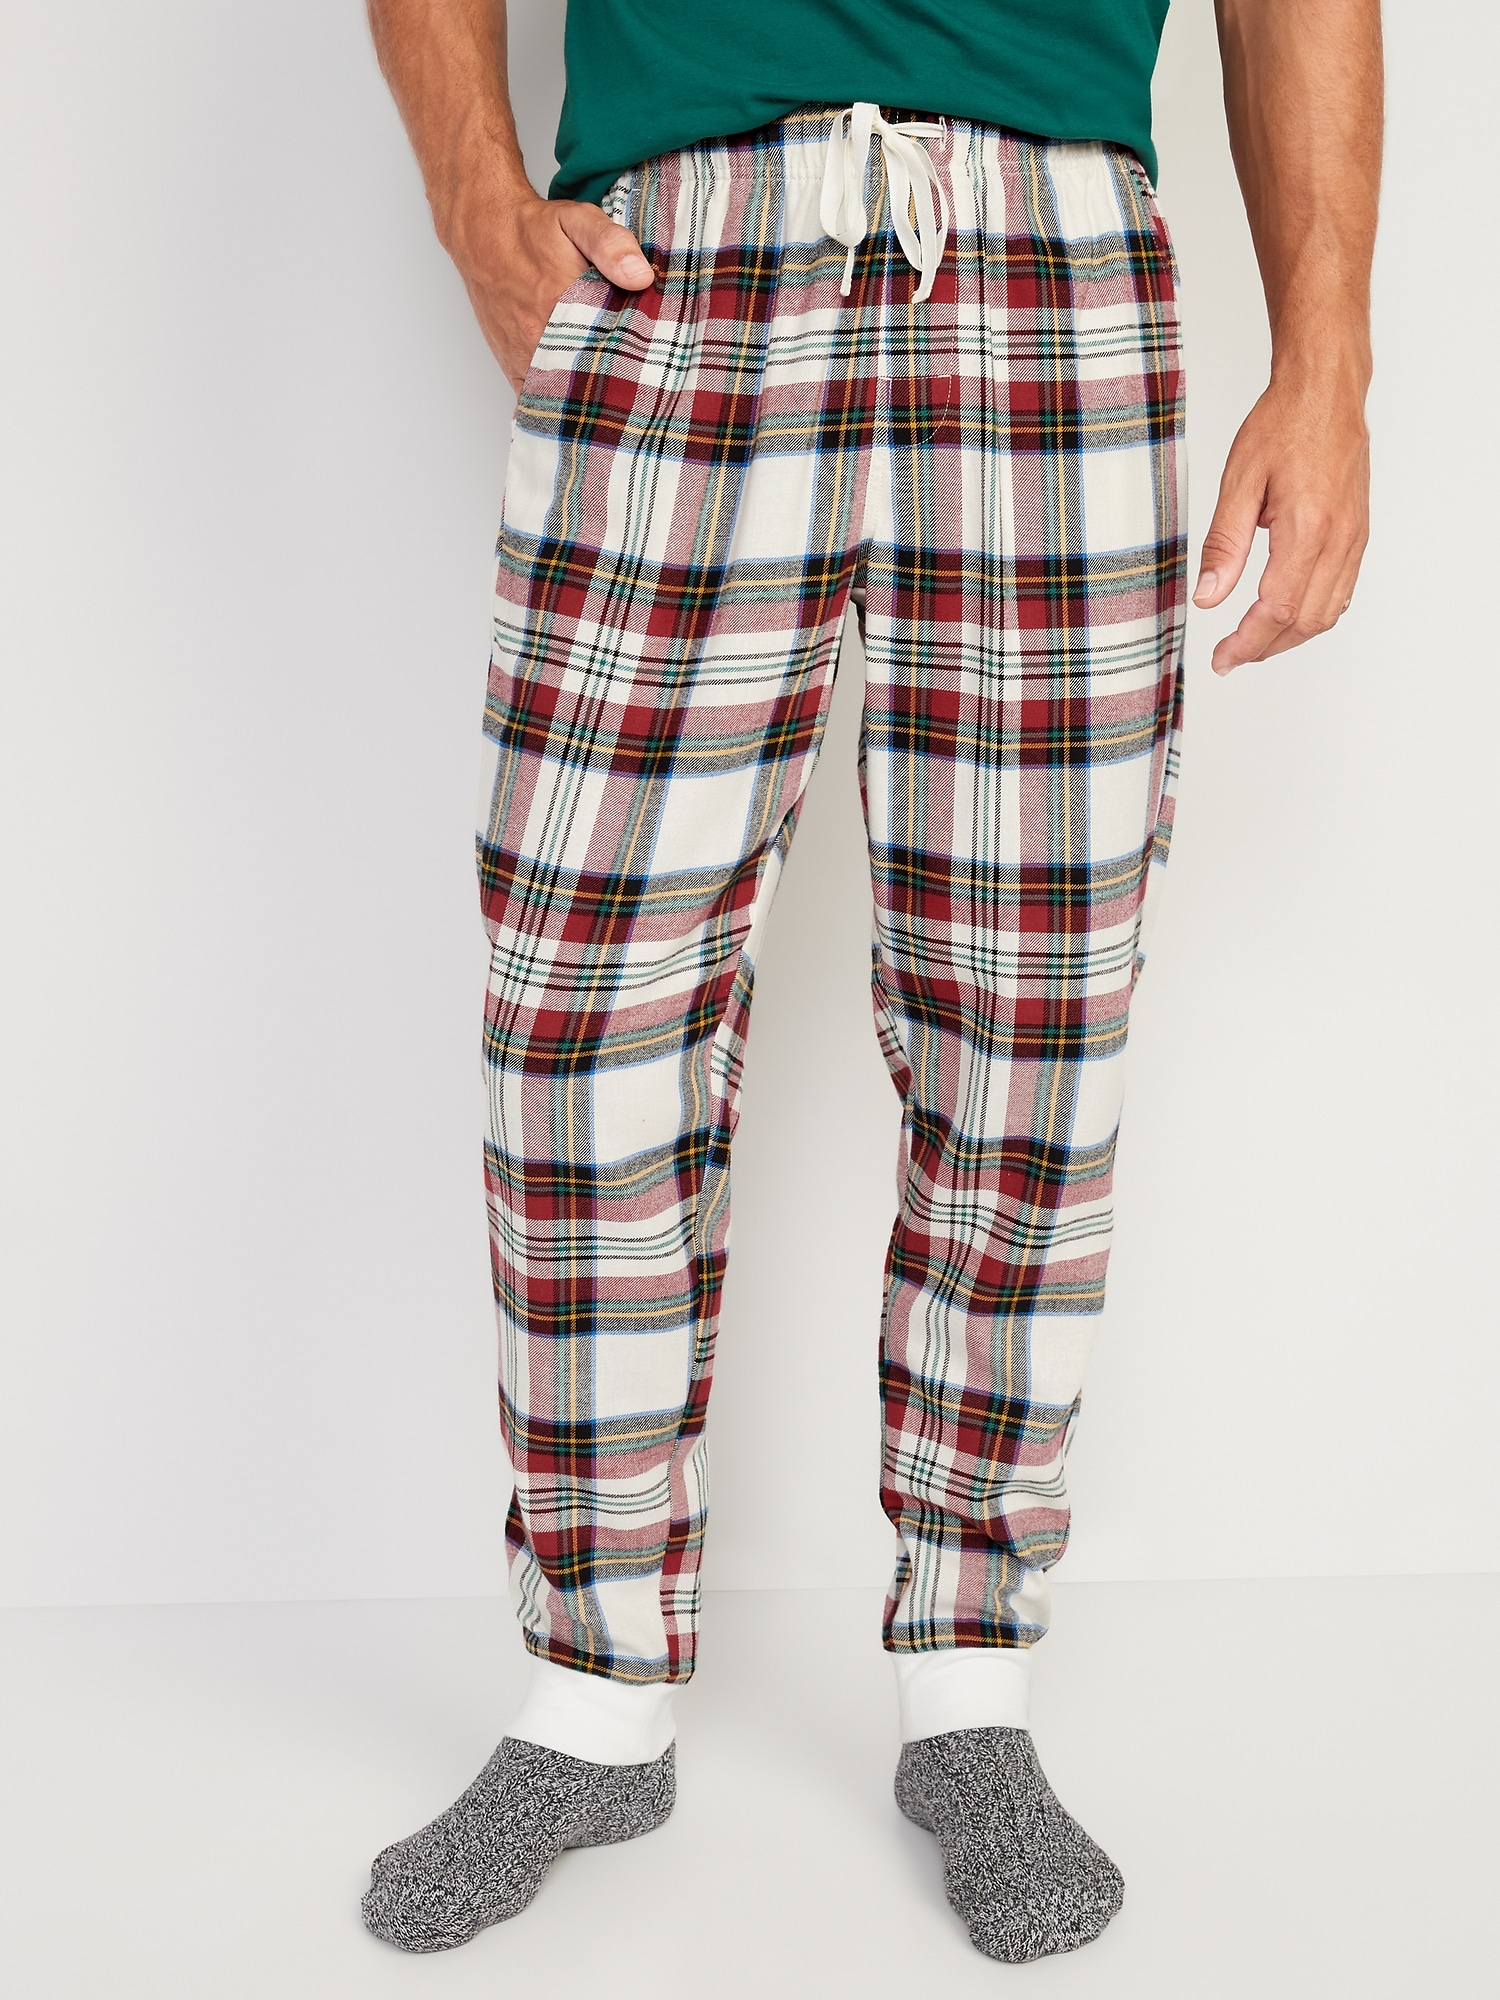 Matching Printed Flannel Jogger Pajama Pants for Men  Old Navy